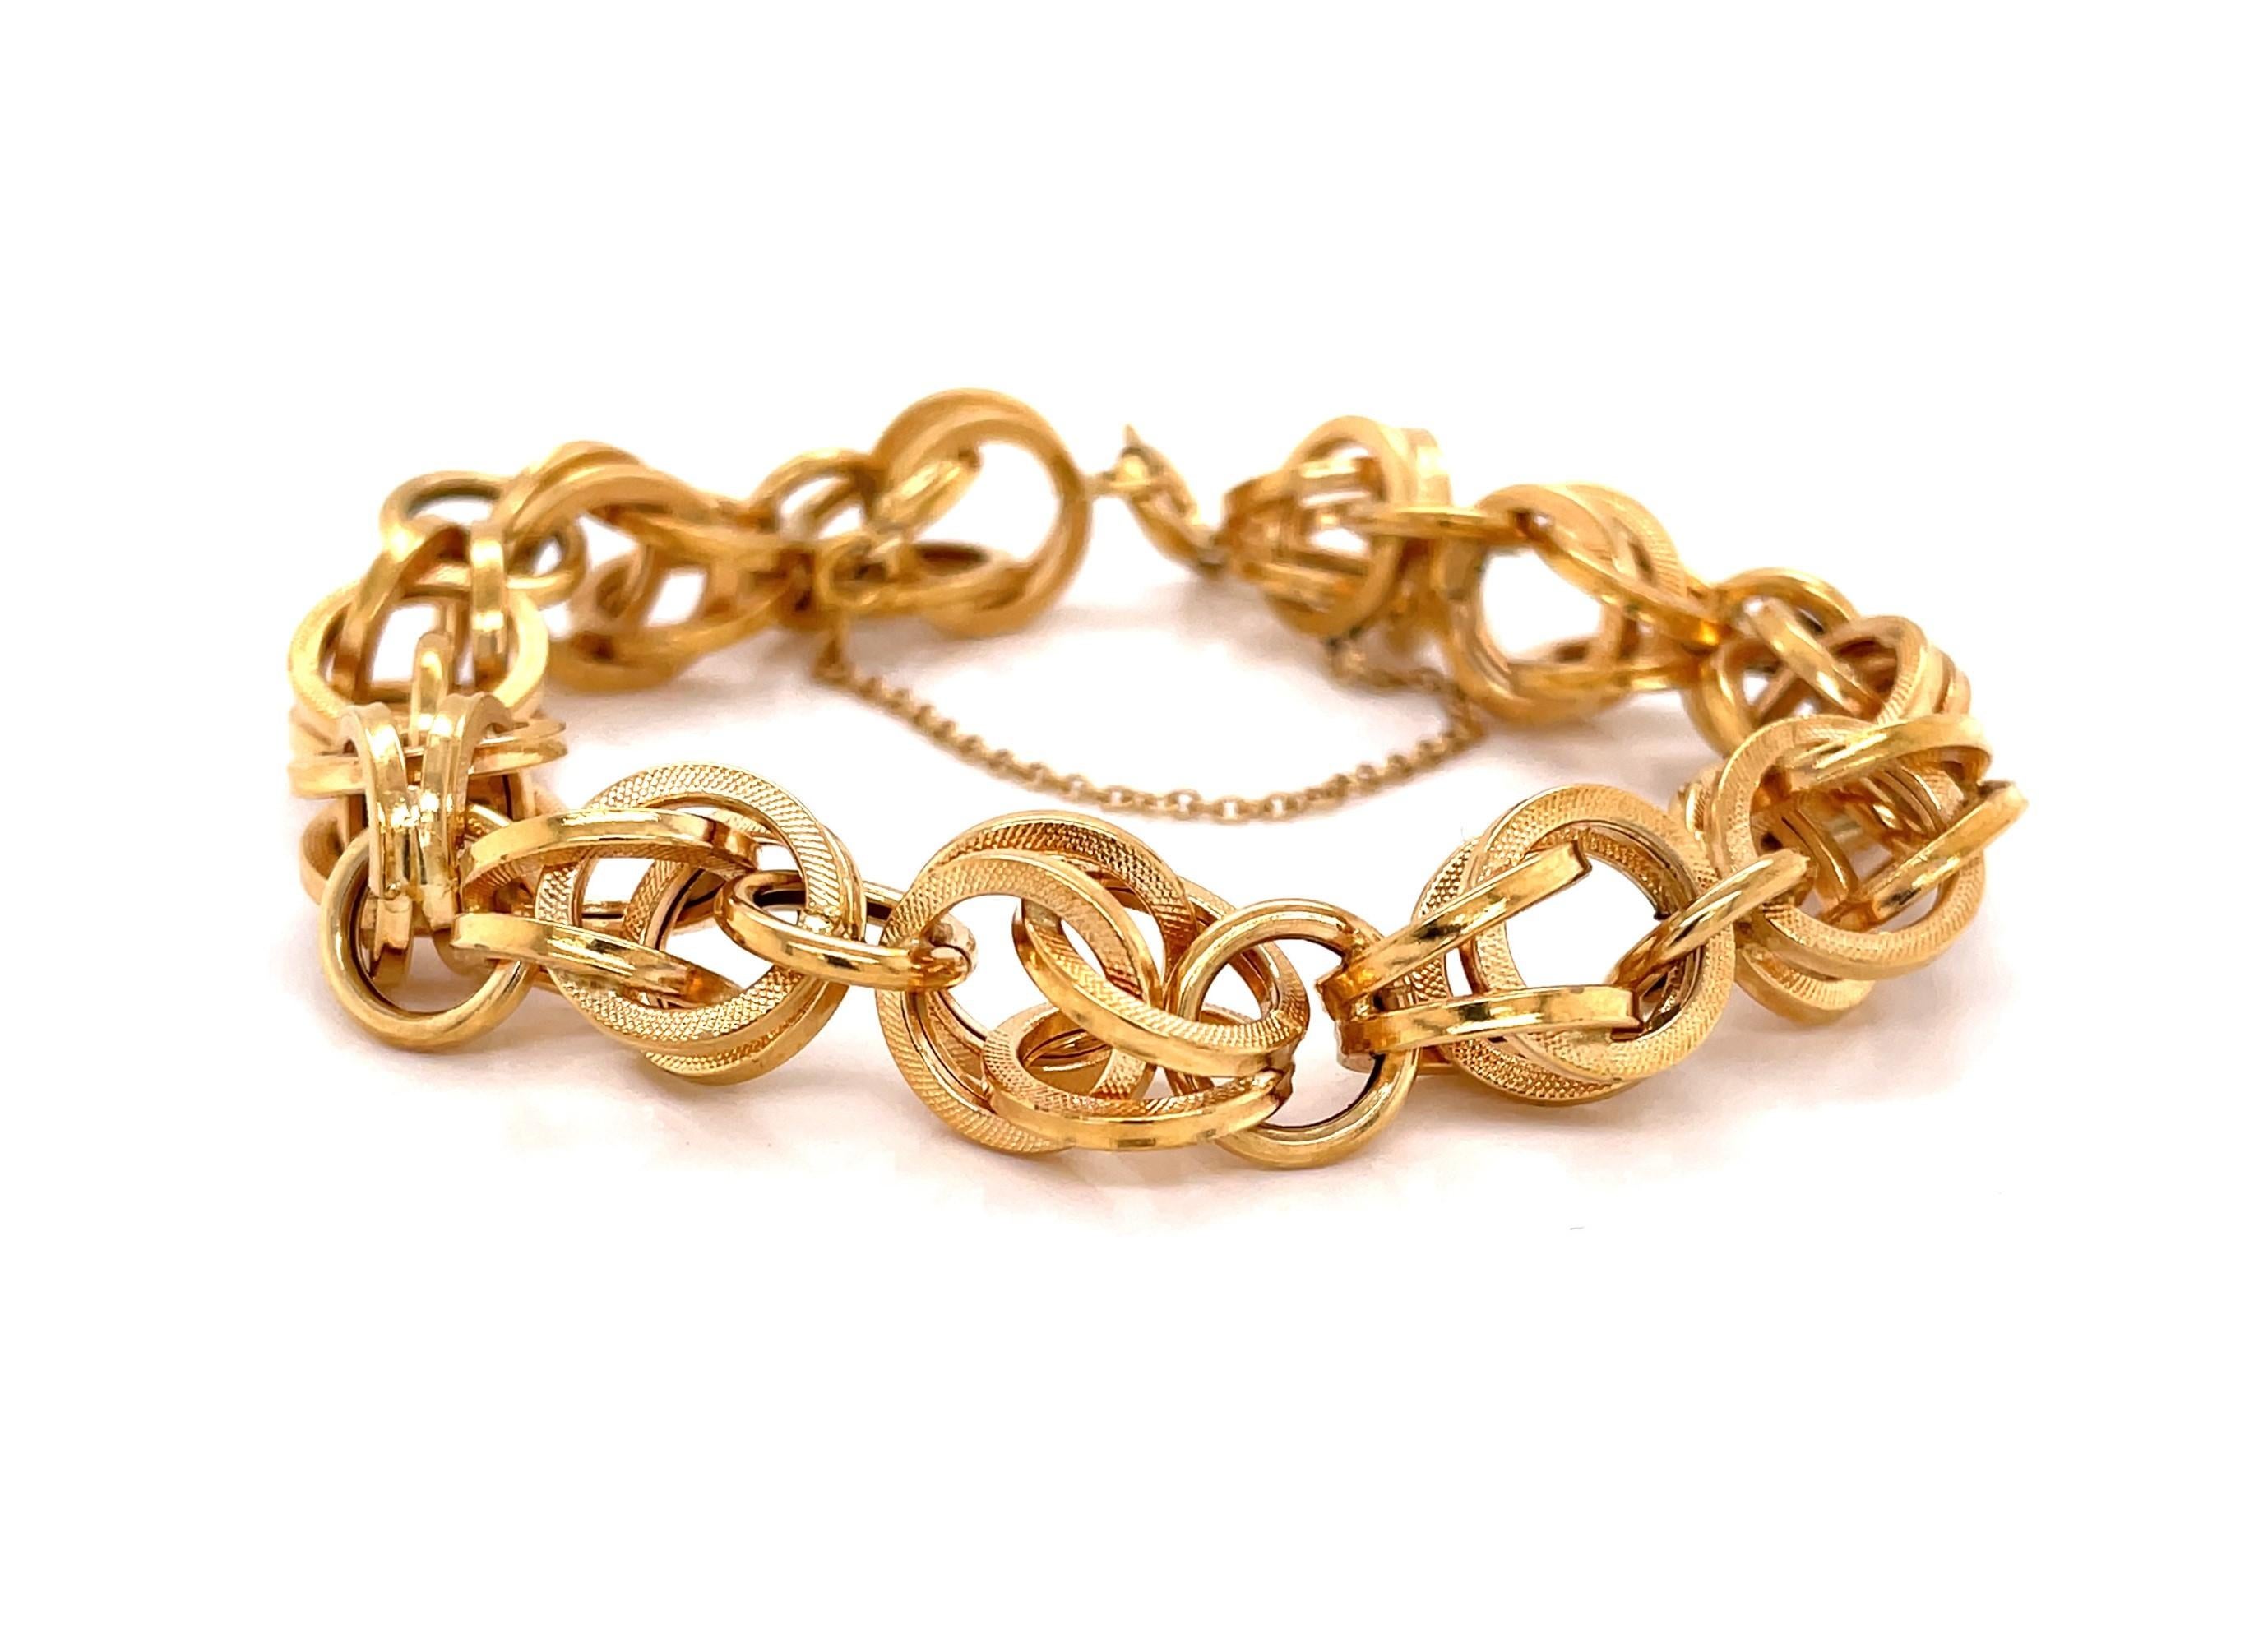 Integrated double links of bright and satin eighteen karat 18K yellow gold reflect plenty of light and create interest on this timeless eight inch chain link style bracelet. With a moderate overall width measurement of approximately 11.5mm, this